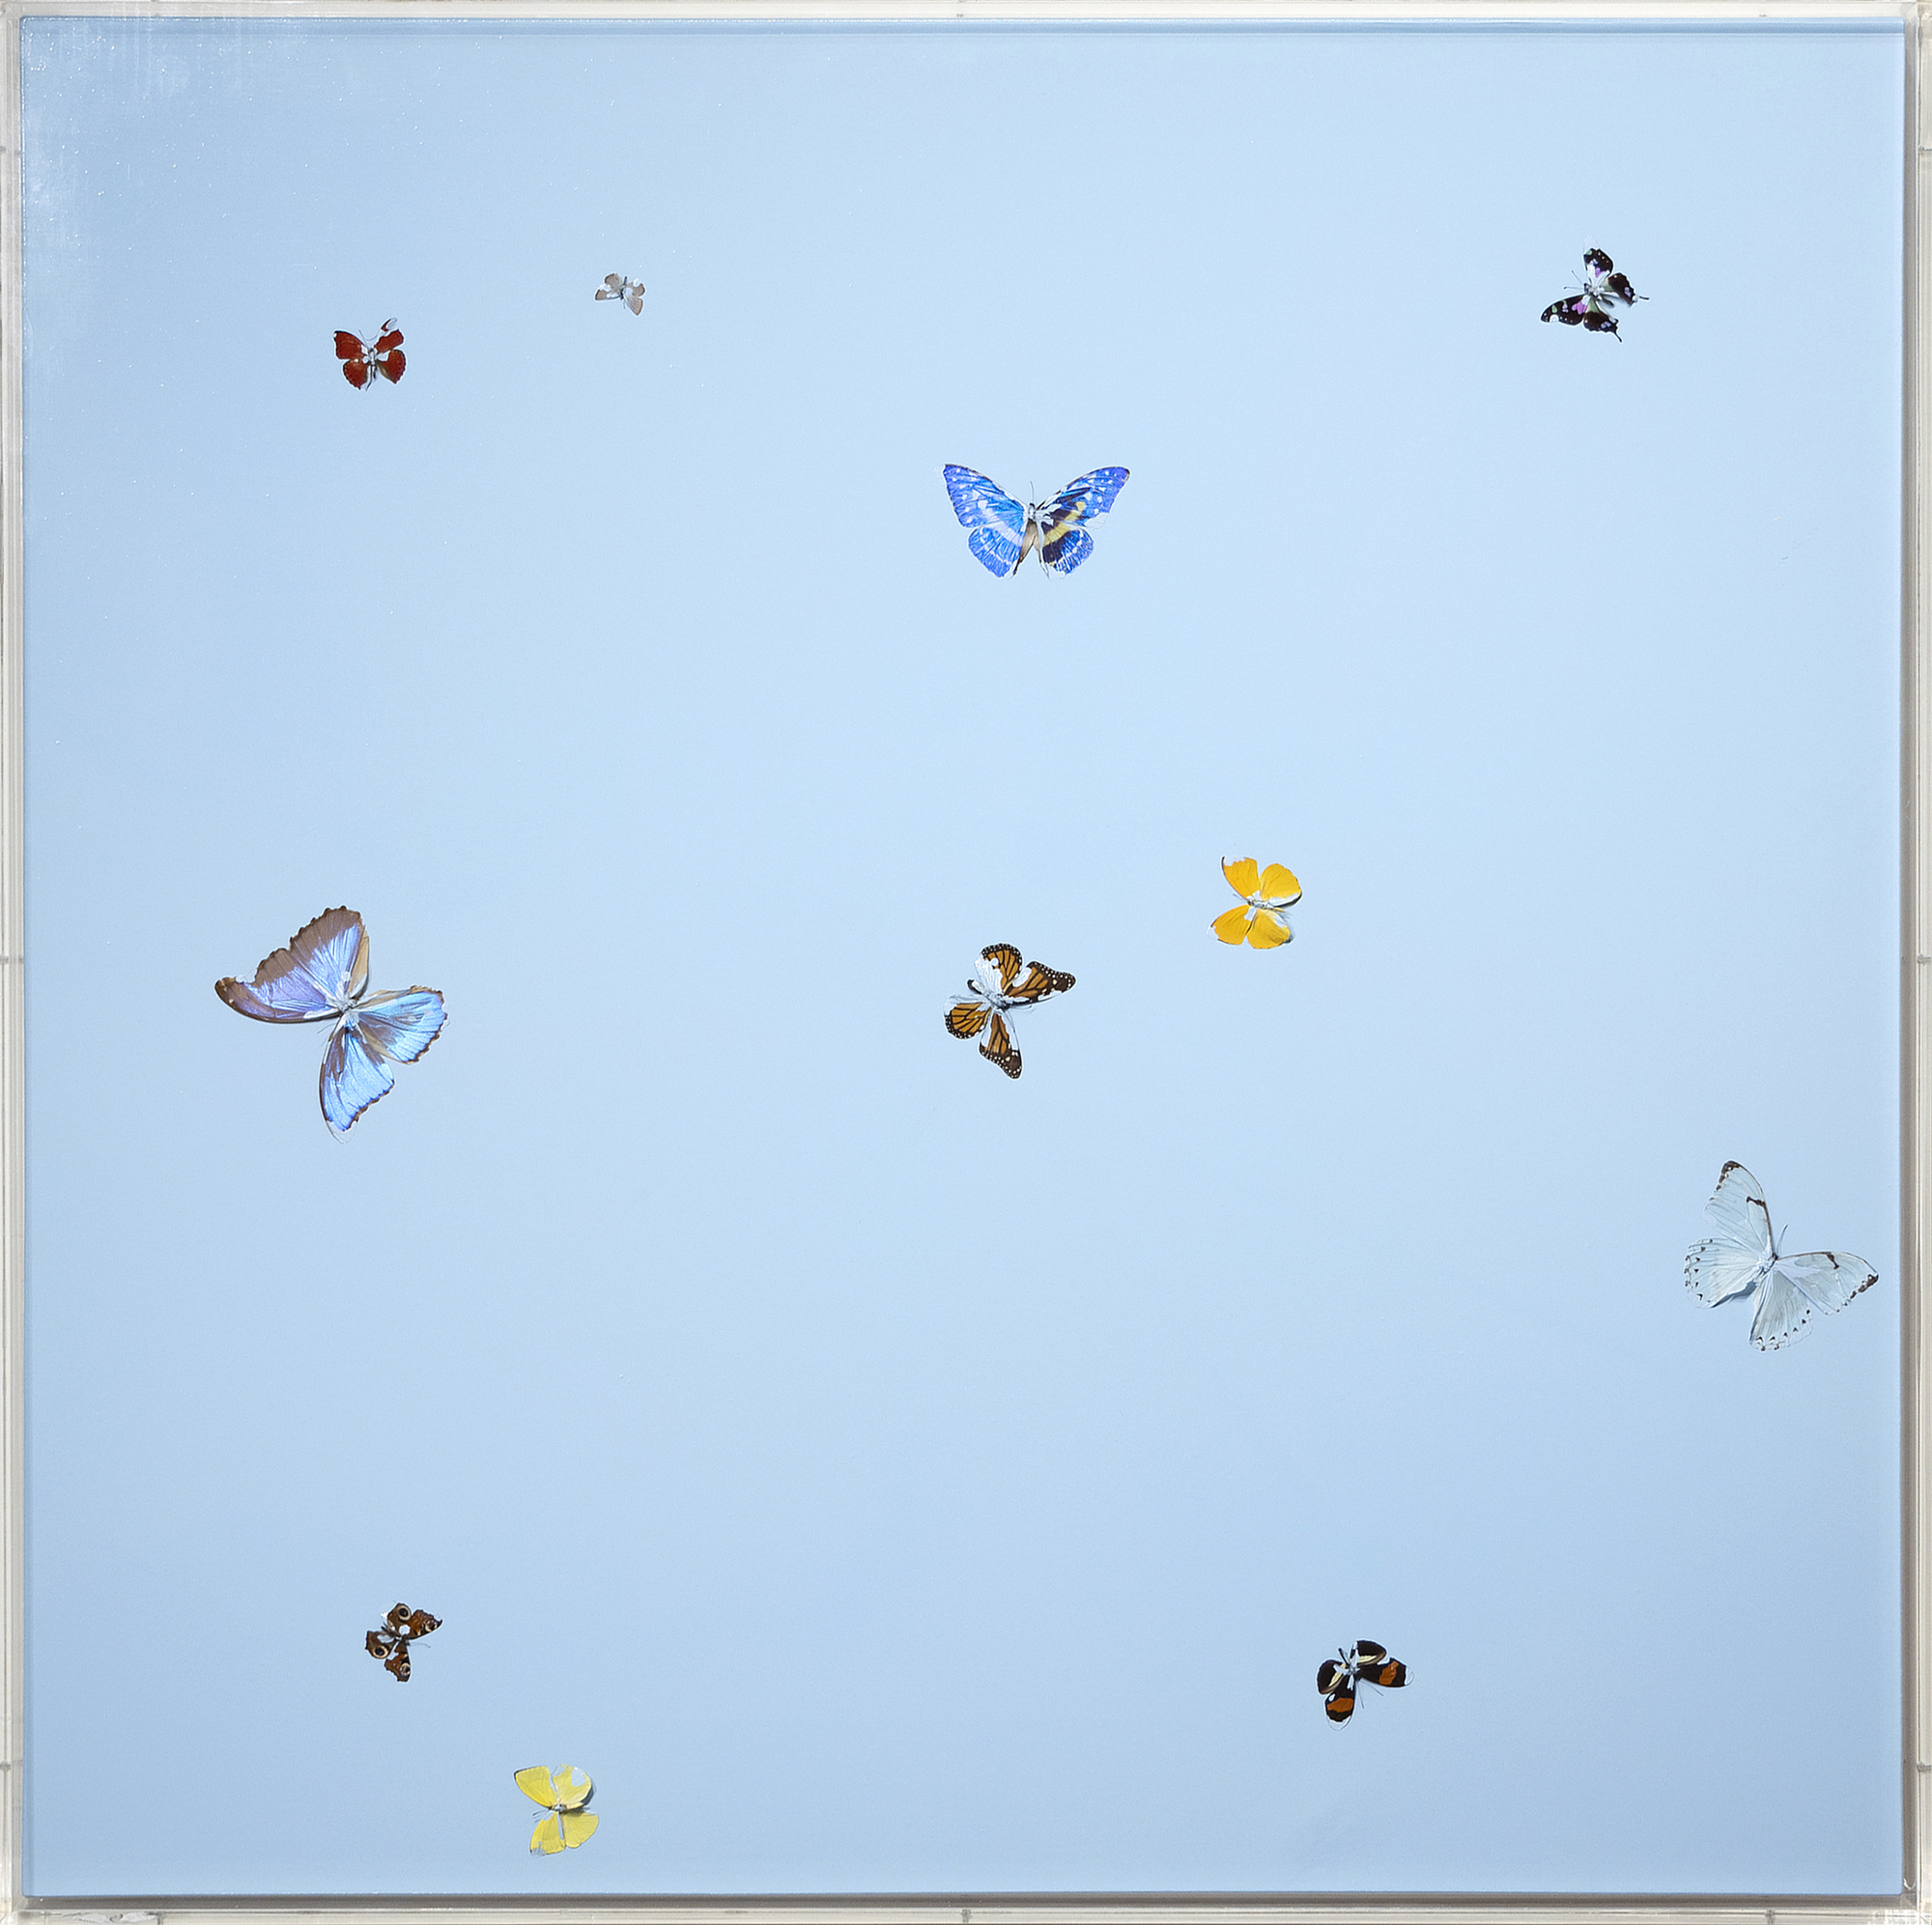 DAMIEN HIRST - Forgotten Thoughts - butterflies and household gloss on canvas - 68 x 68 x 1 3/8 in. (point-to-point)